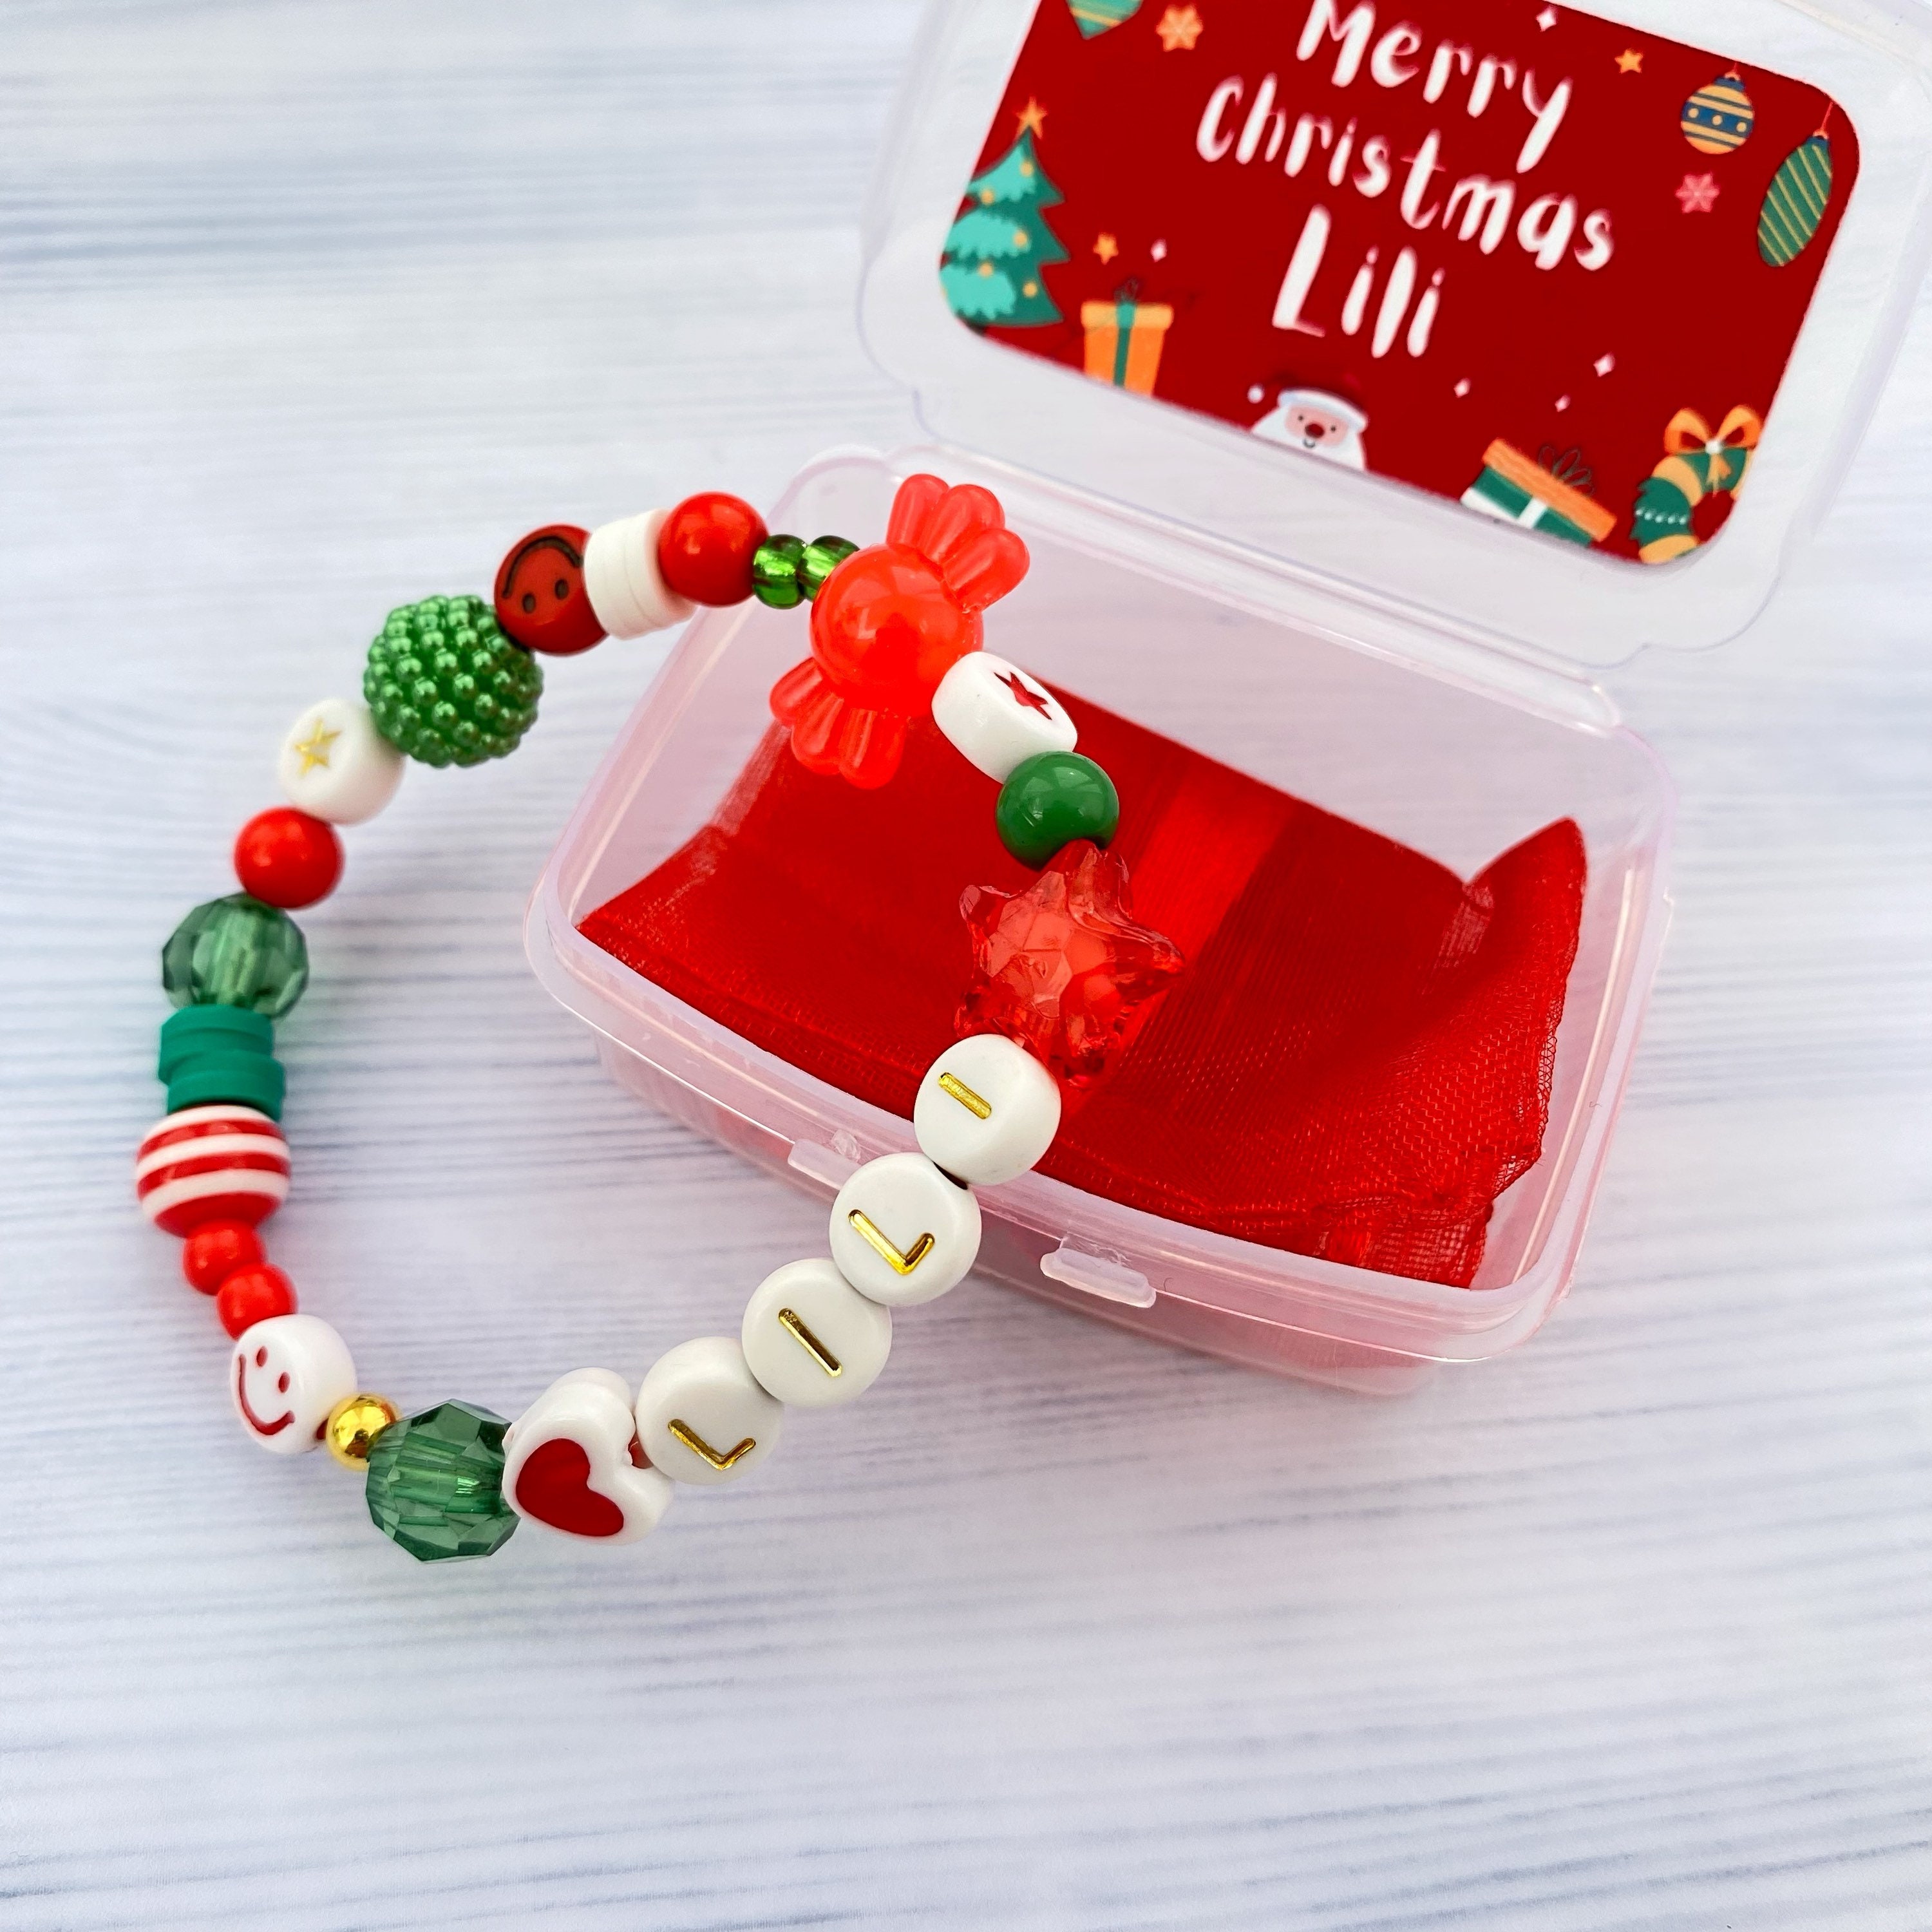 Colorful Beaded Making Sushi Rice DIY Bracelet Making Kit For Girls  Handmade Friendship Braces Perfect Christmas Gift From Meetaccessories,  $15.88